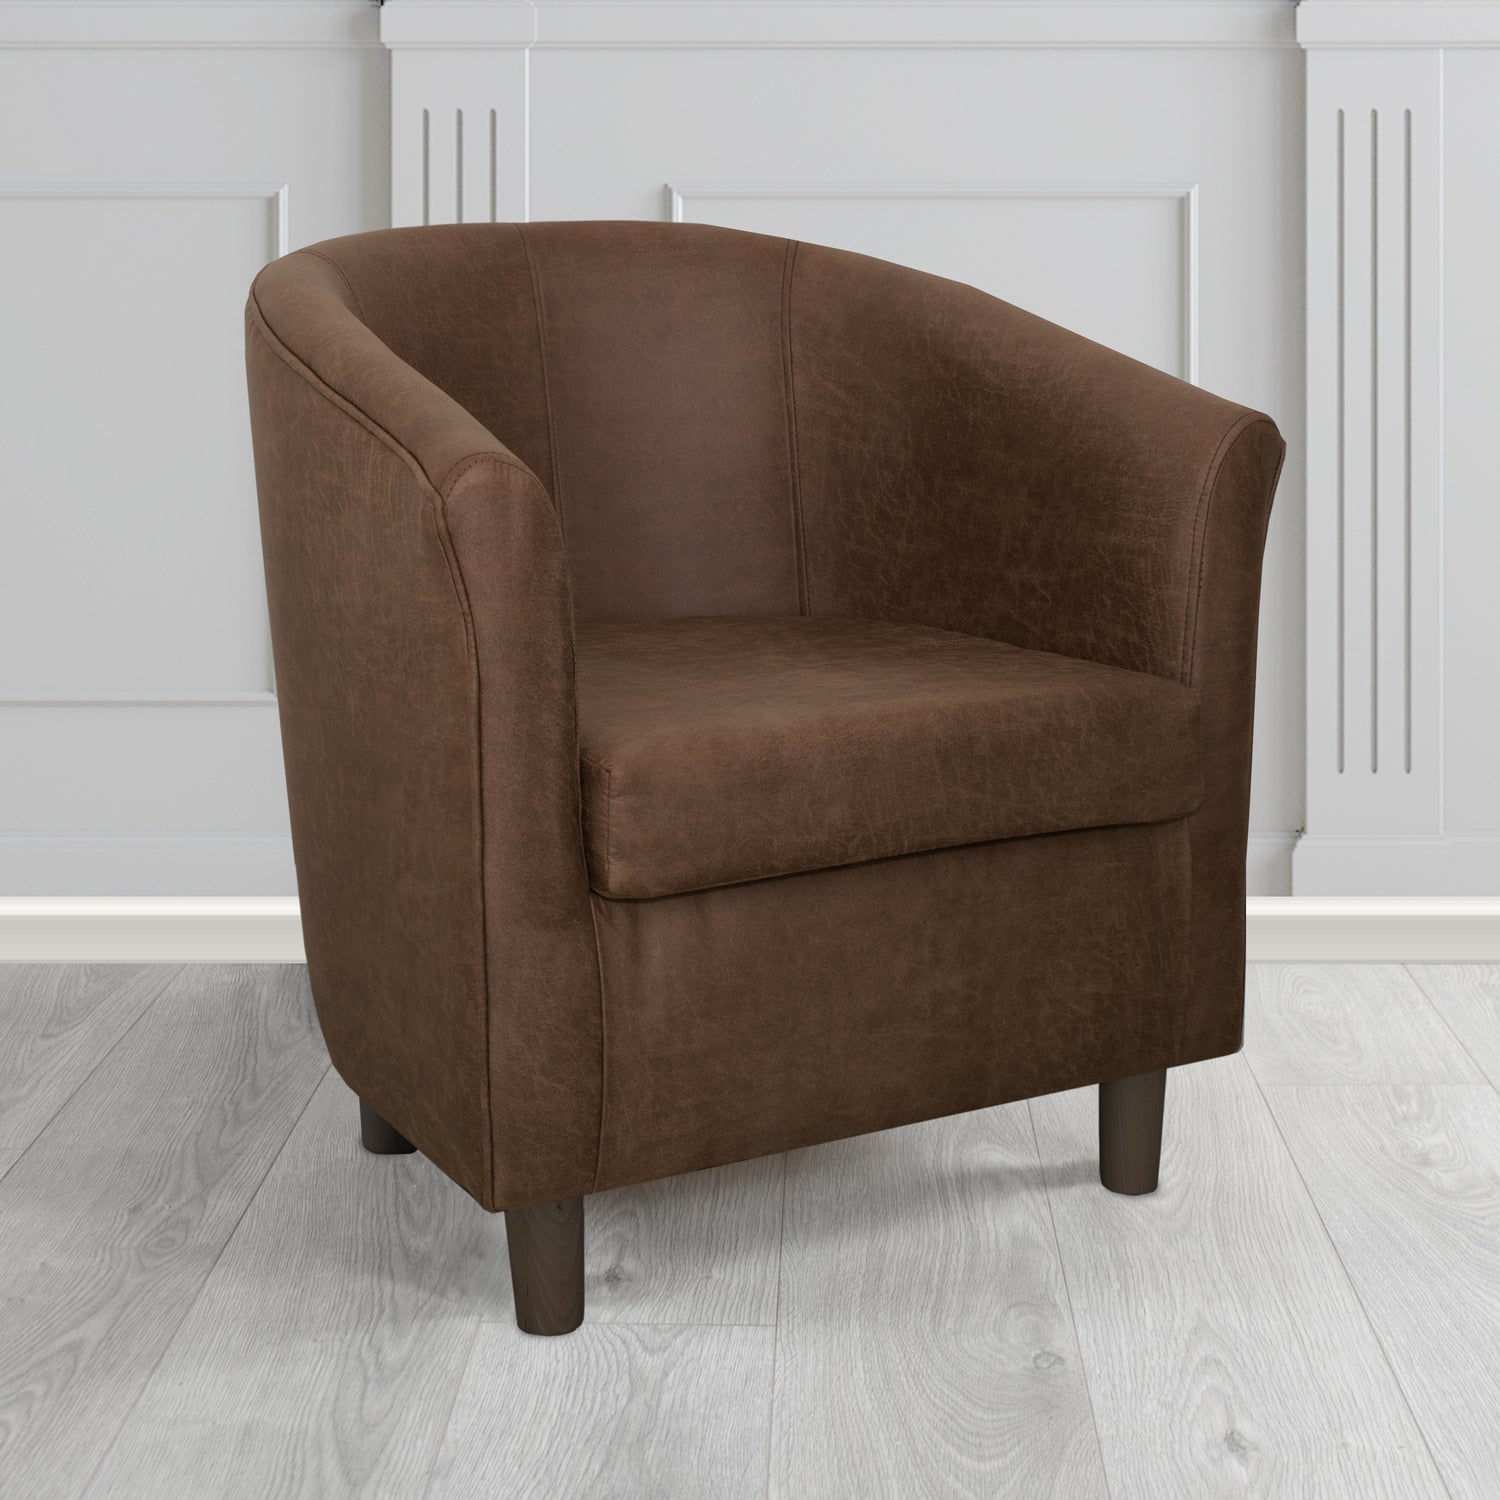 Tuscany Rhodeo Chocolate Faux Leather Tub Chair